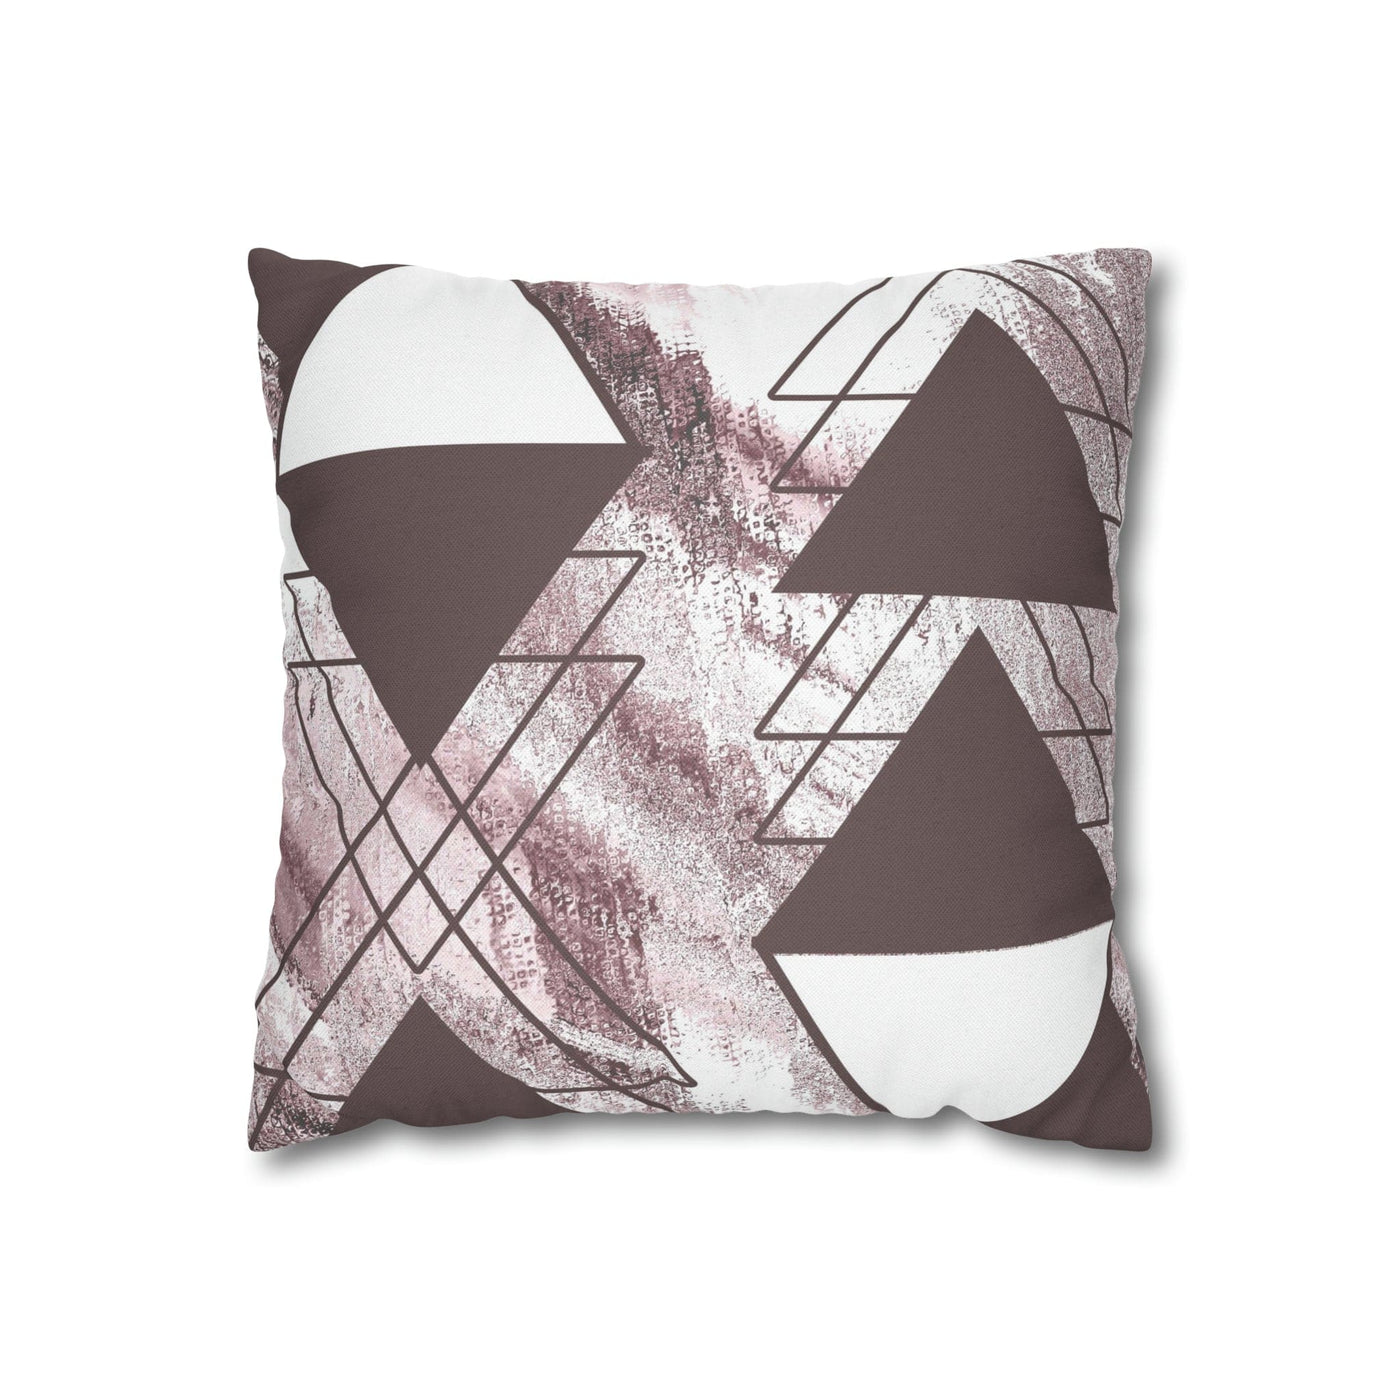 Decorative Throw Pillow Covers With Zipper - Set Of 2 Mauve Rose And White